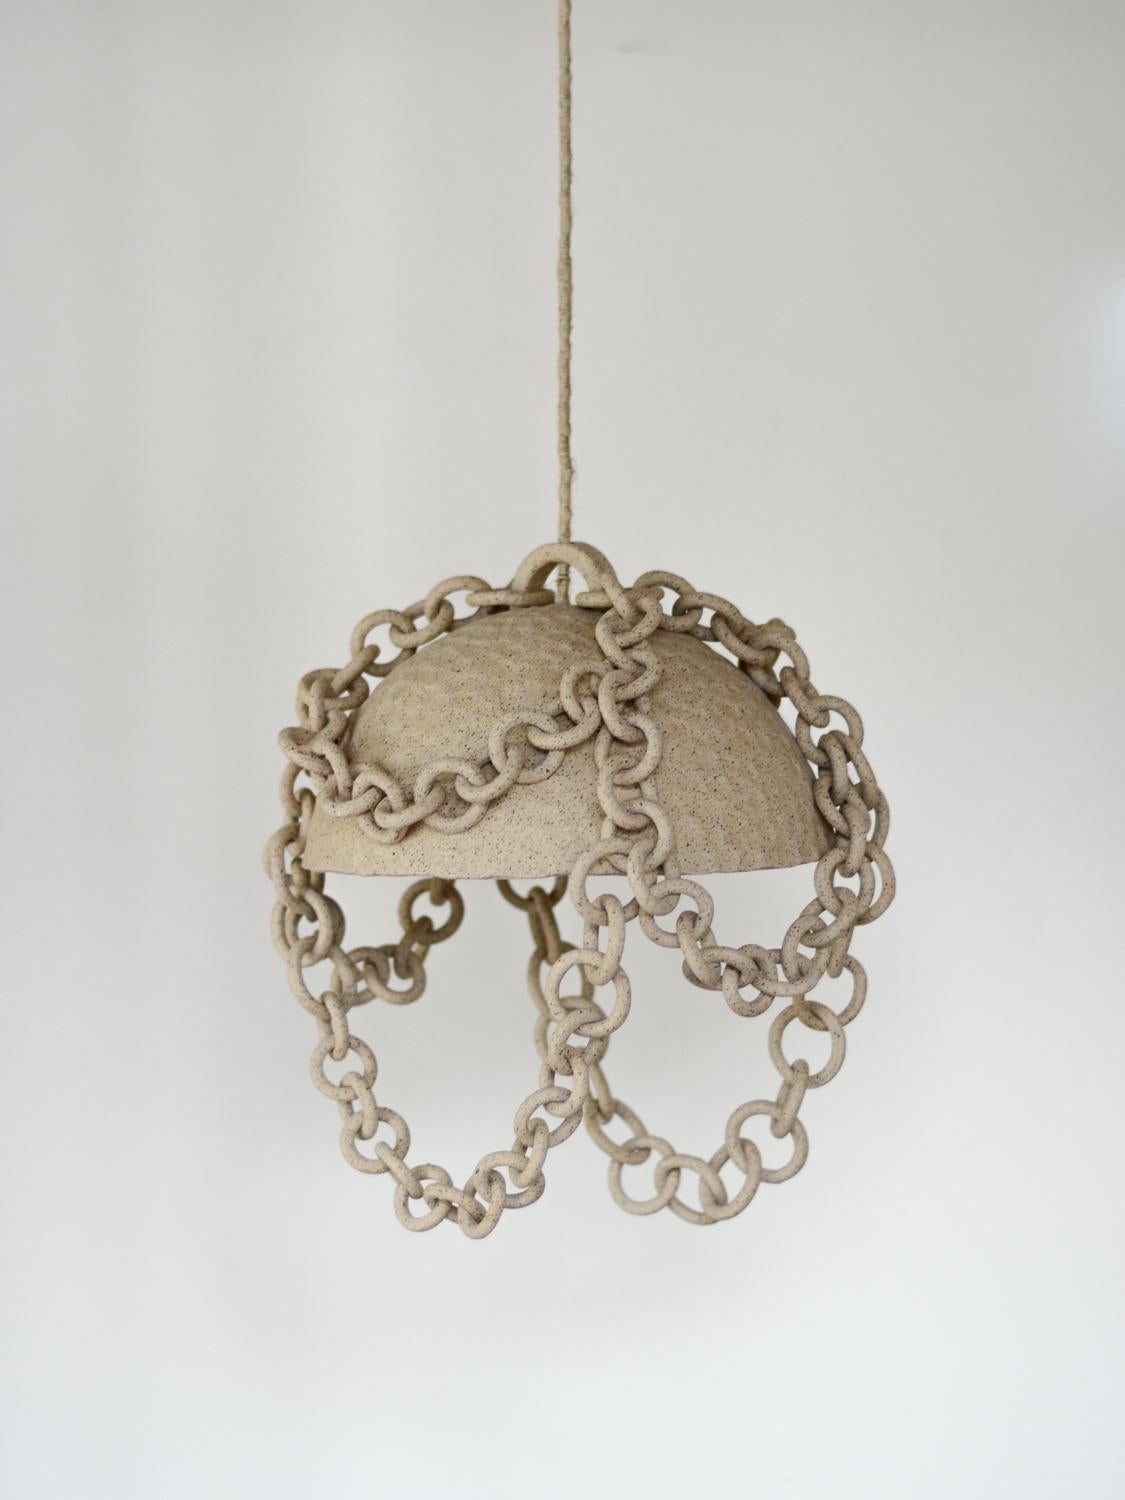 THIS CHANDELIER IN CLAY #60 IS READY TO SHIP FOR OTHER COLORS EXPECT 5-6 WEEKS FOR ORDER TO SHIP
 
The ceramic chandelier  is a captivating piece of art that seamlessly blends earthy, organic modern aesthetics with a nomadic, bohemian or beachside